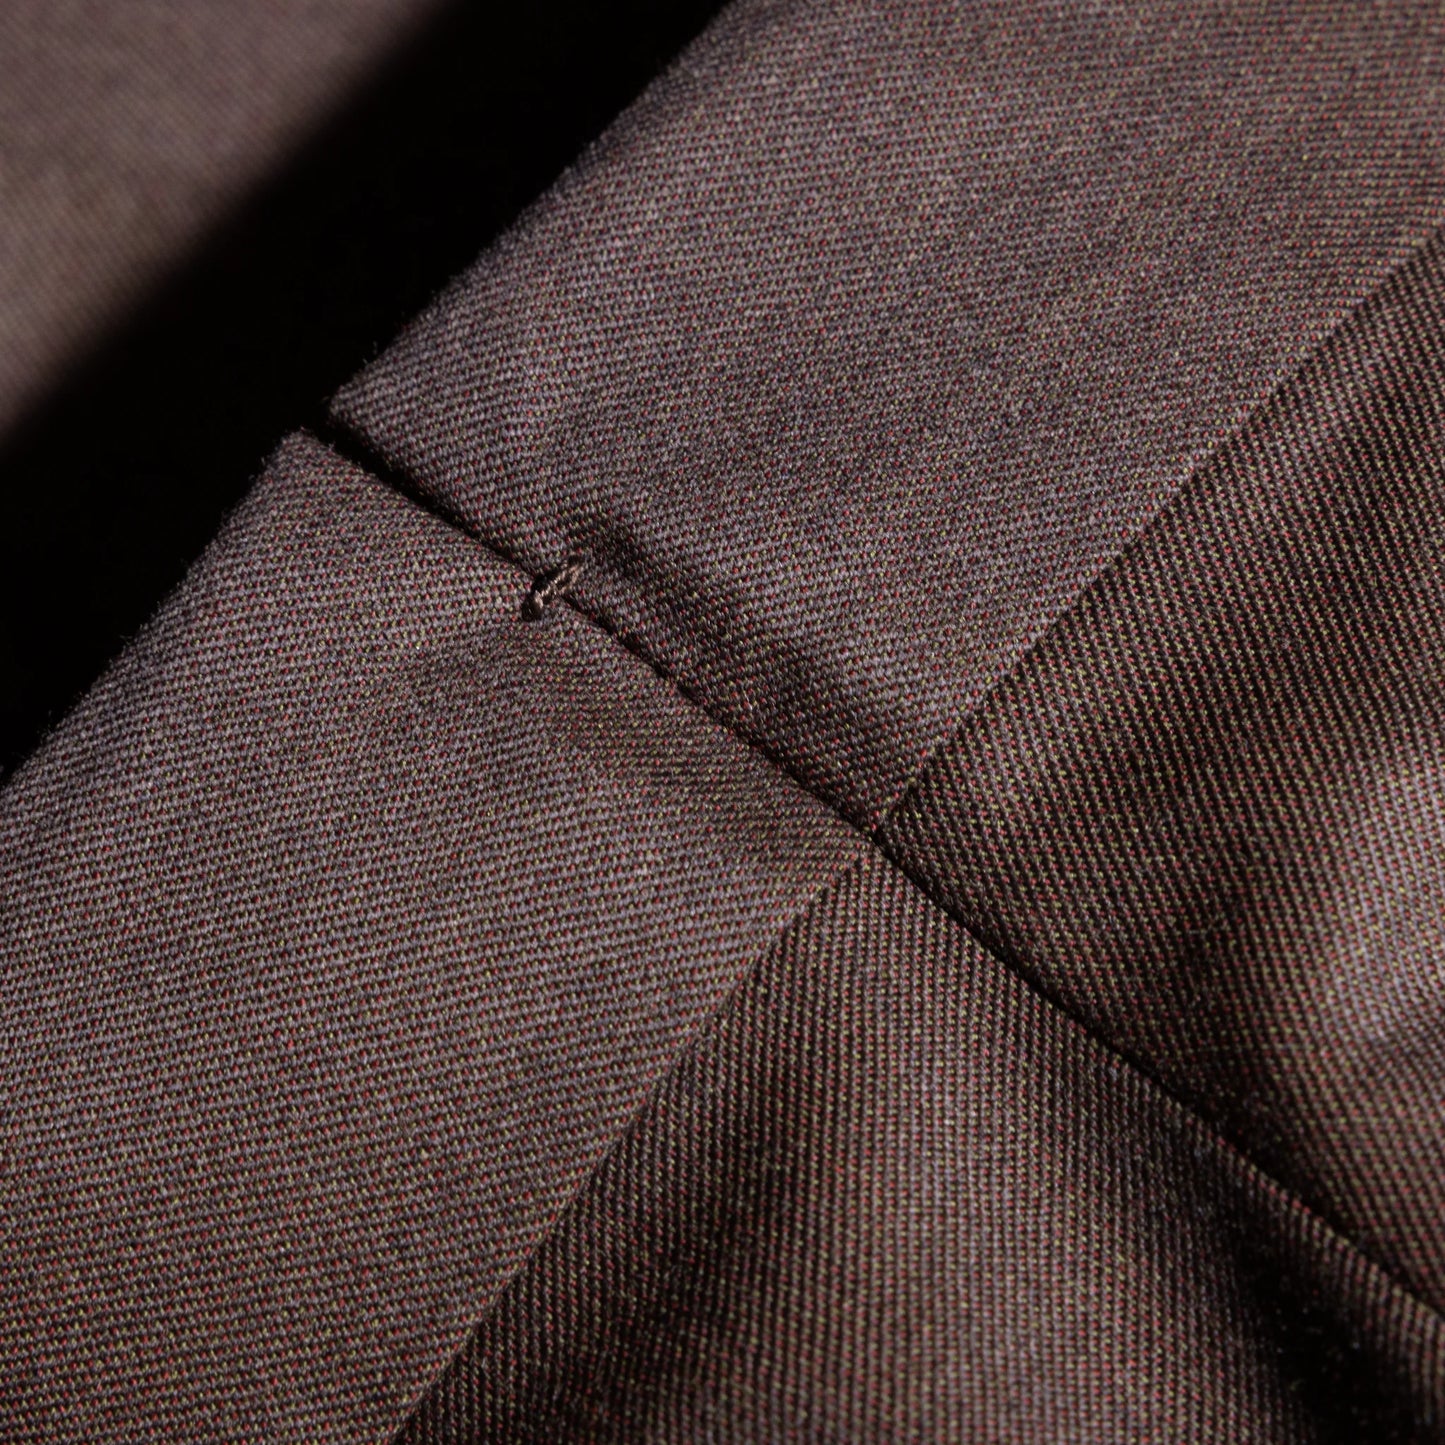 Trousers Lyon brown and olive Wool and Cashmere twill